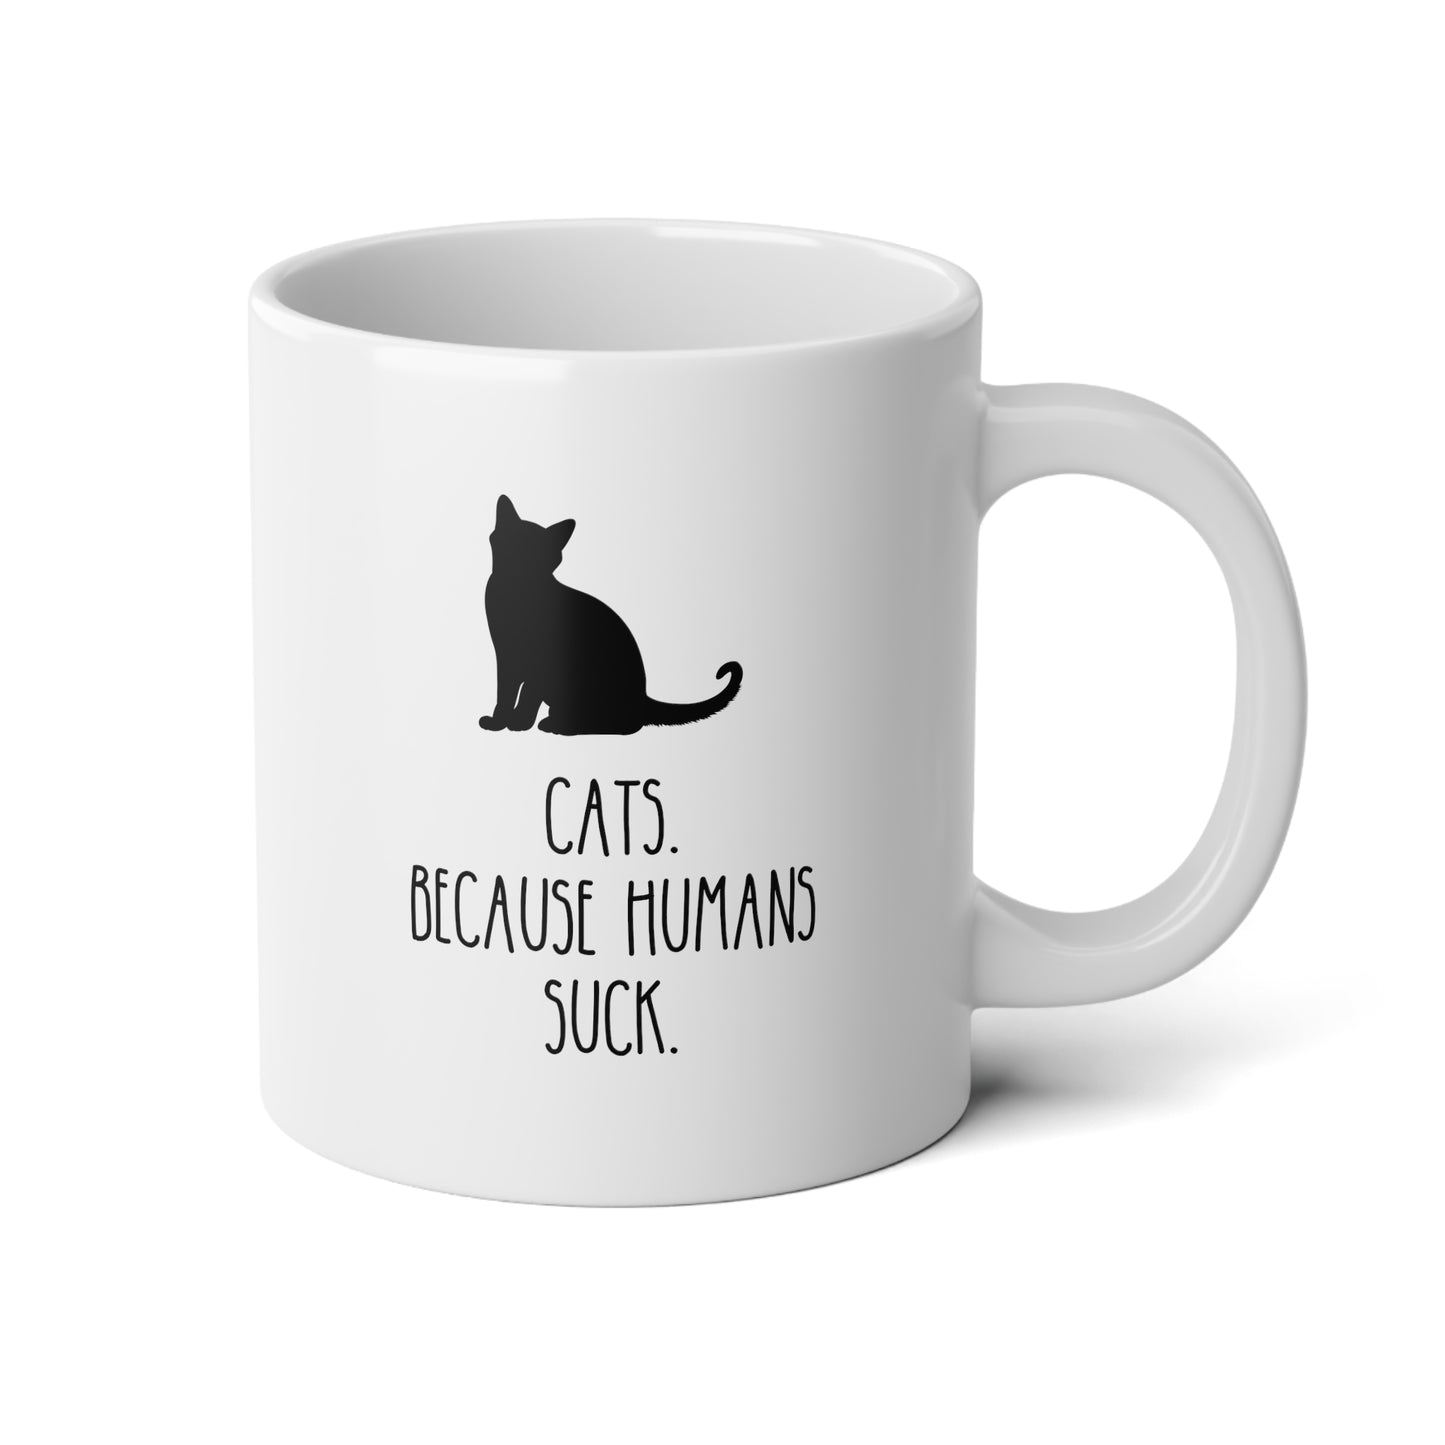 Cats Because Humans Suck 20oz white funny large coffee mug gift for fur mom lady feline owner waveywares wavey wares wavywares wavy wares